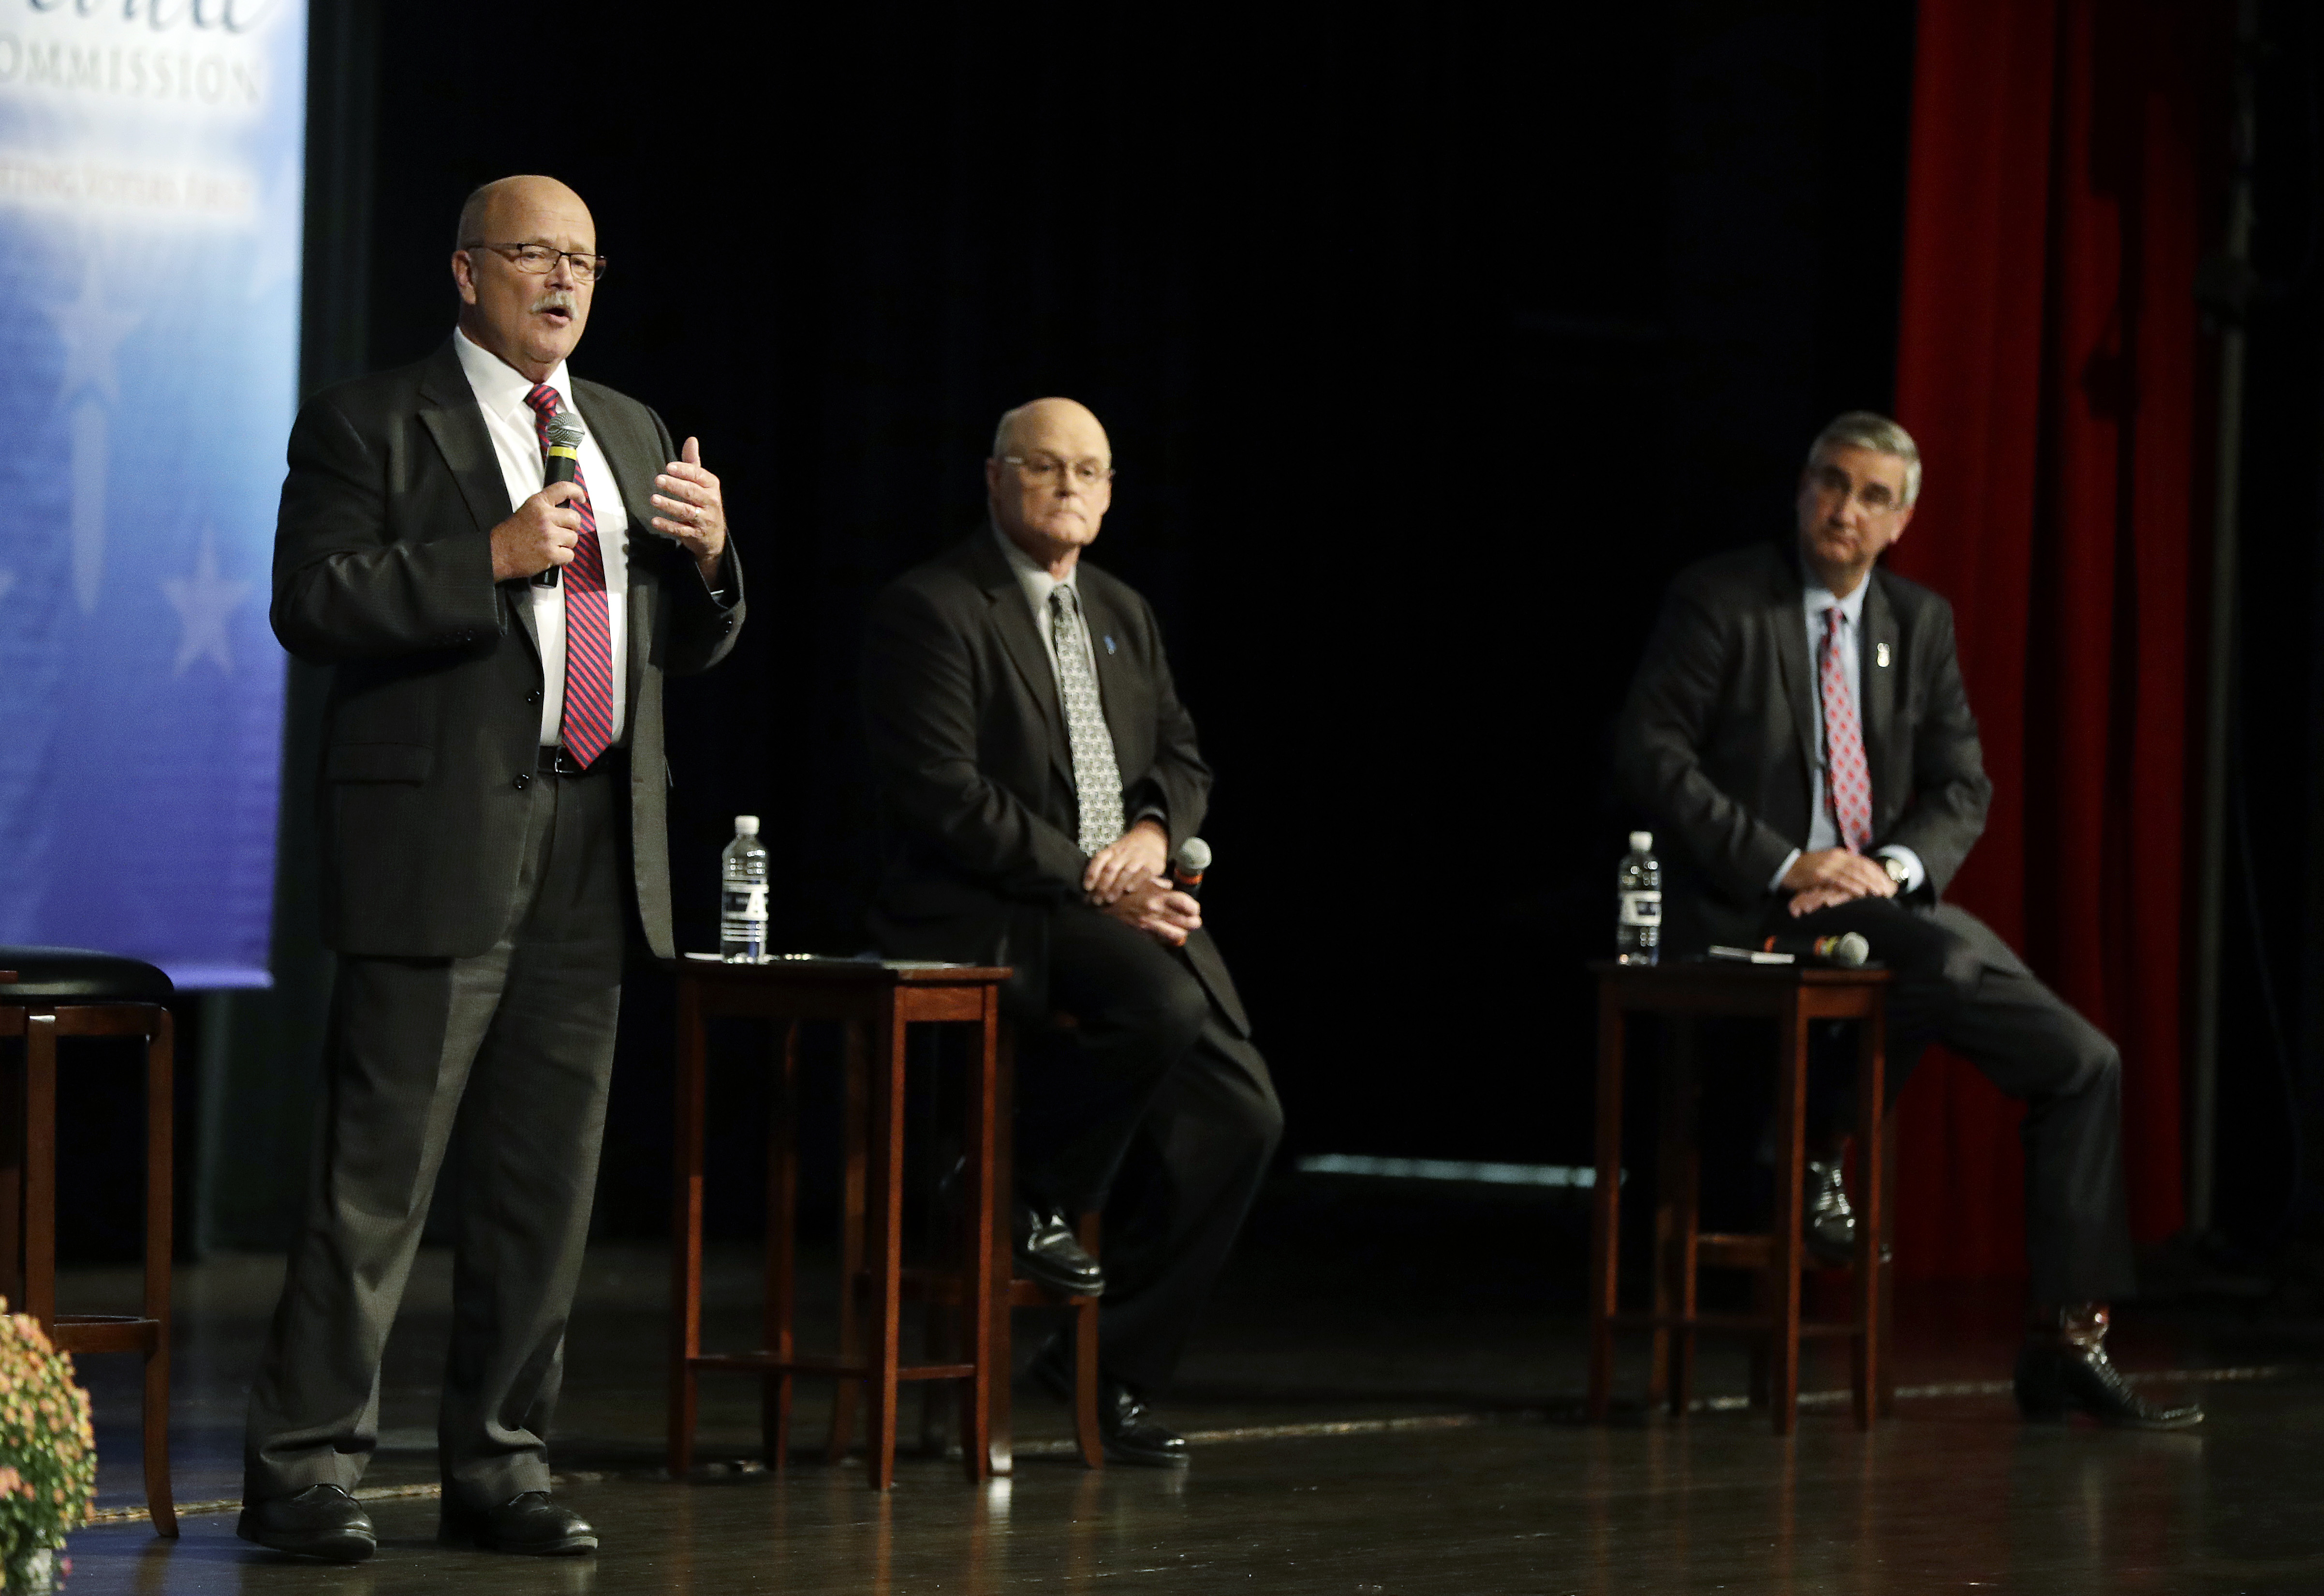 Democrat John Gregg, left,  responds to a question during a debate for Indiana Governor, Tuesday, Sept. 27, 2016, in Indianapolis. Libertarian Rex Bell and Republican Lt. Gov. Eric Holcomb also participated in the debate.